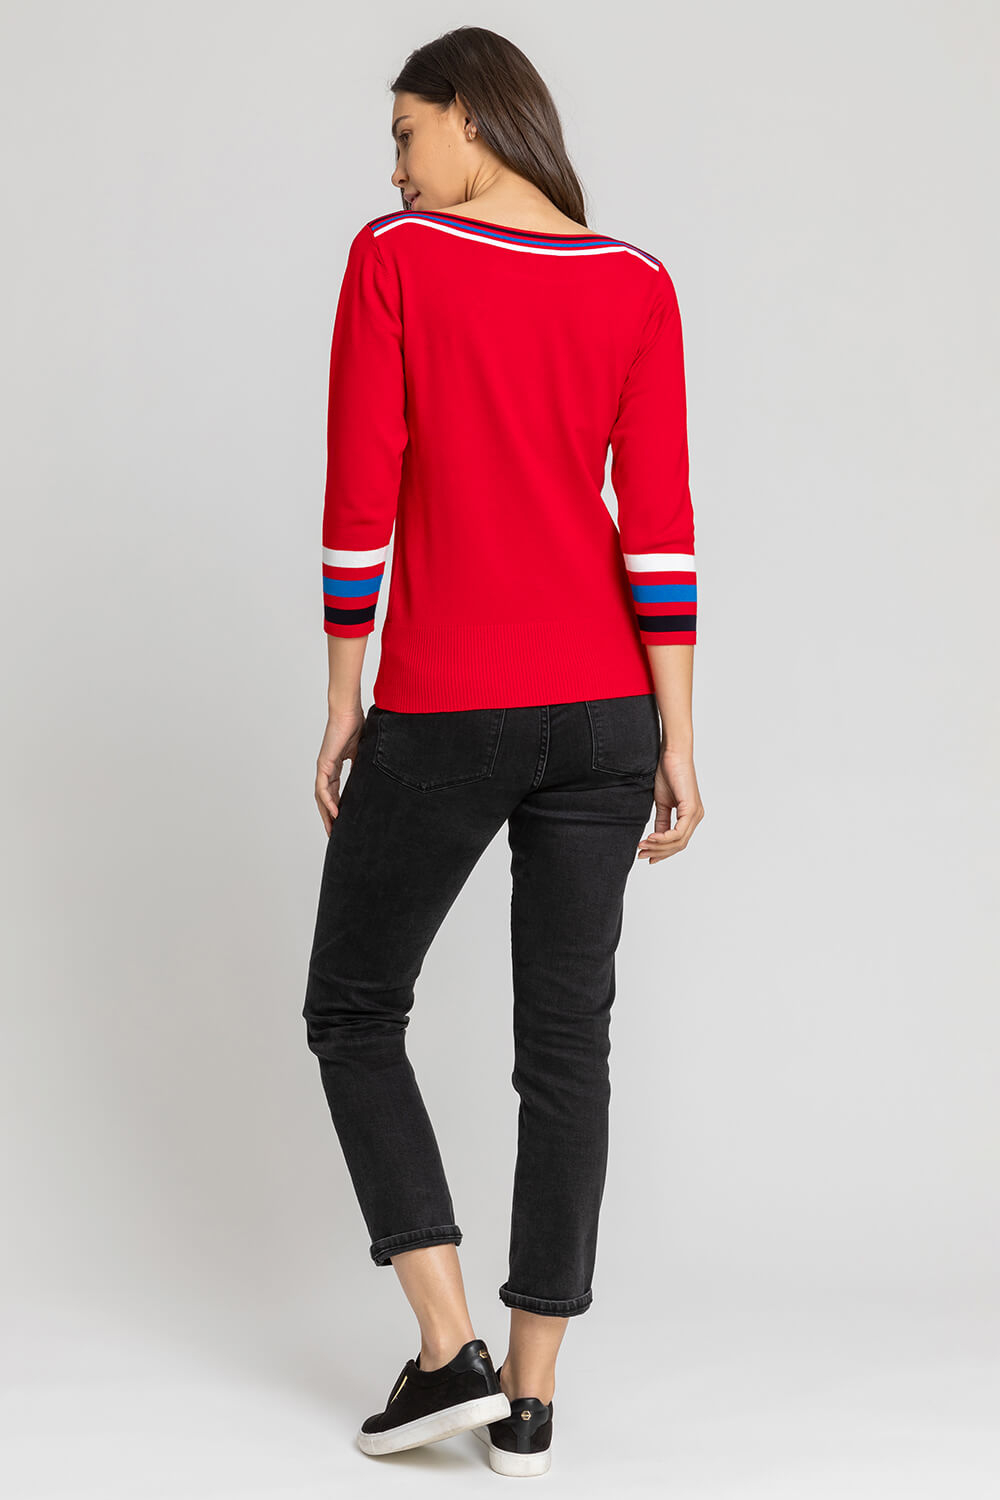 Red Heart Embroidered Stripe Print Jumper, Image 2 of 4